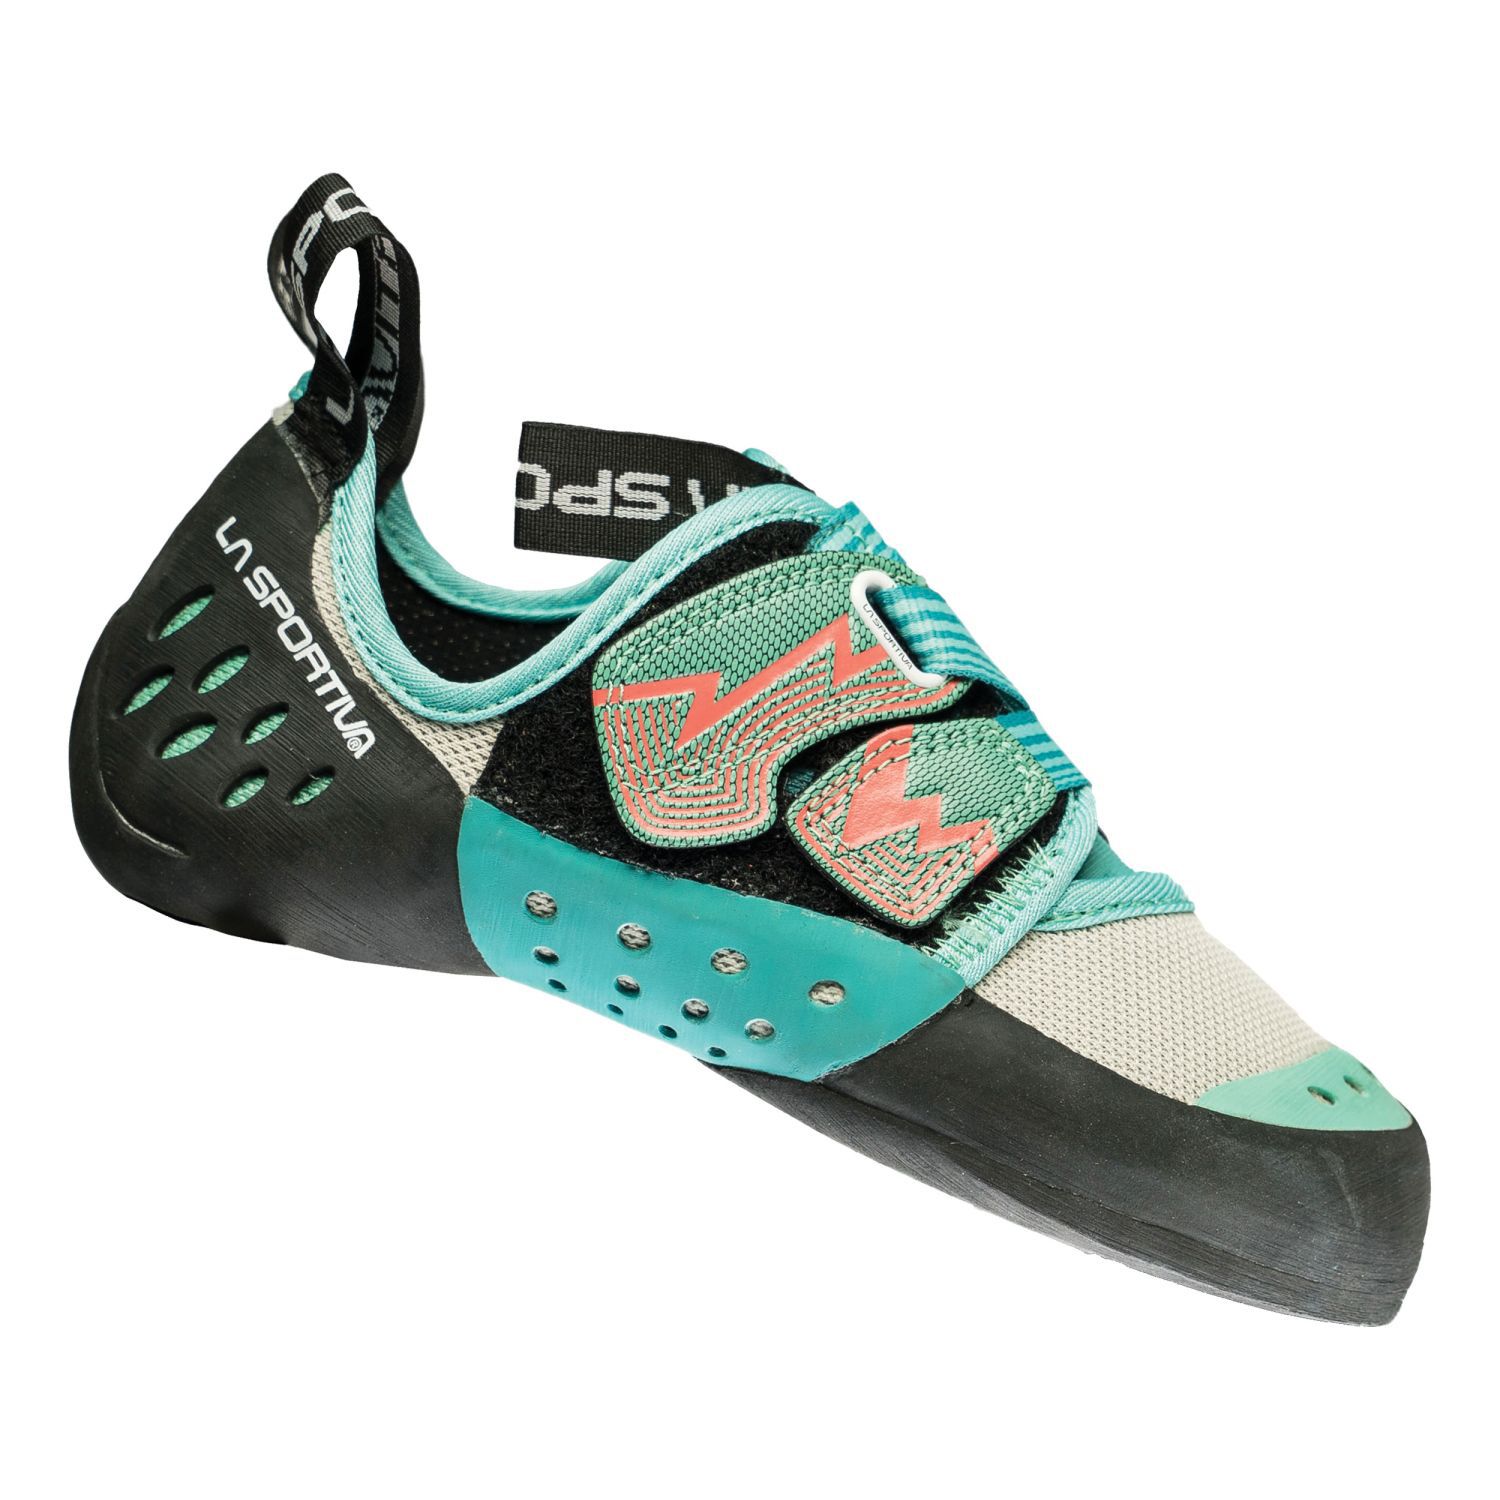 Oxygym Wms Mint/Coral 41.5